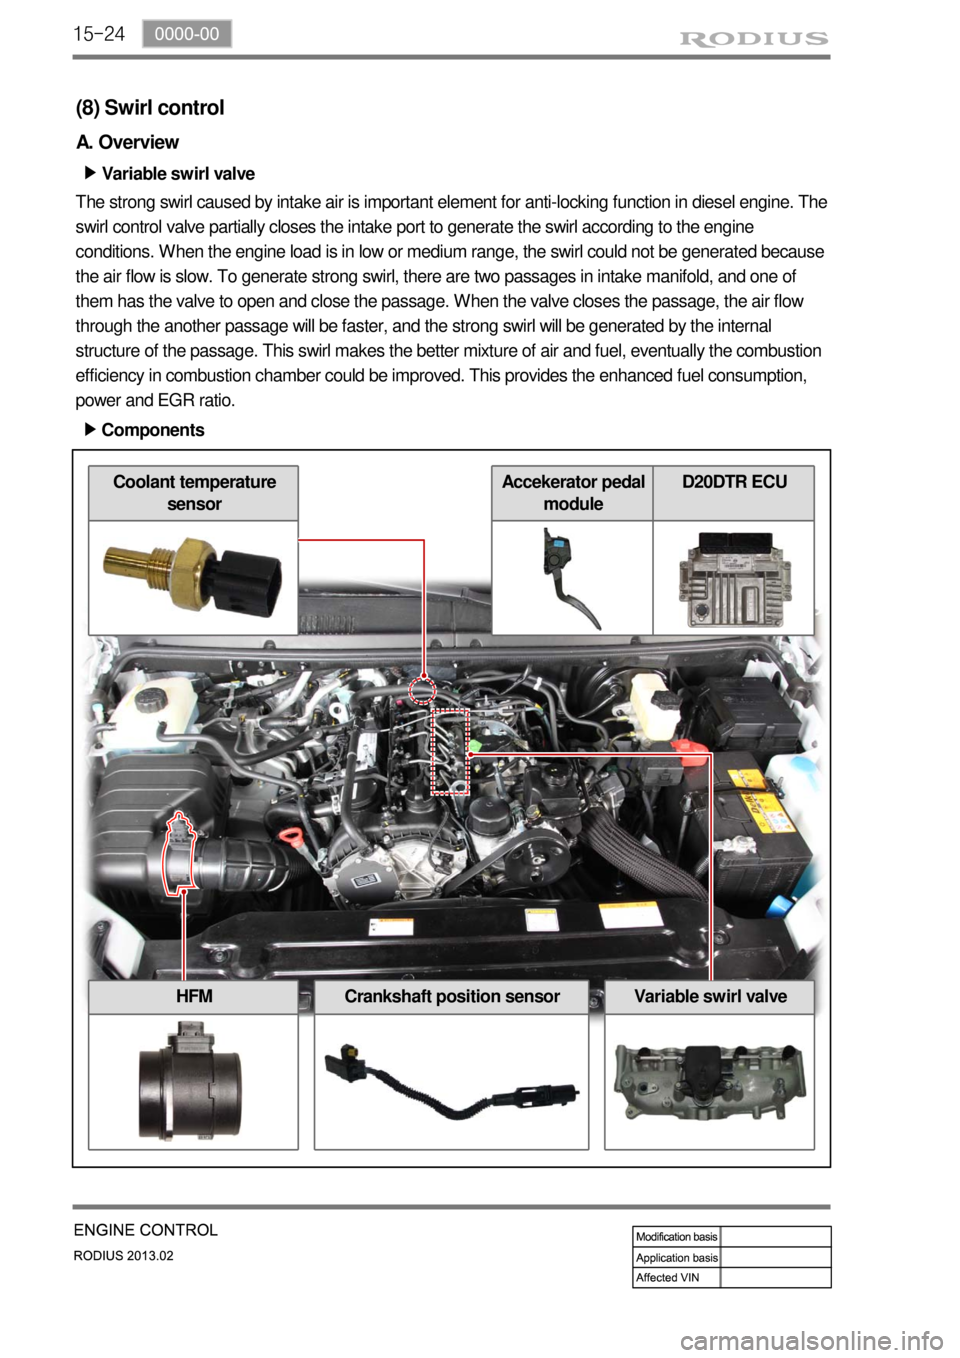 SSANGYONG TURISMO 2013  Service Manual 15-24
(8) Swirl control
A. Overview
Variable swirl valve ▶
The strong swirl caused by intake air is important element for anti-locking function in diesel engine. The 
swirl control valve partially c